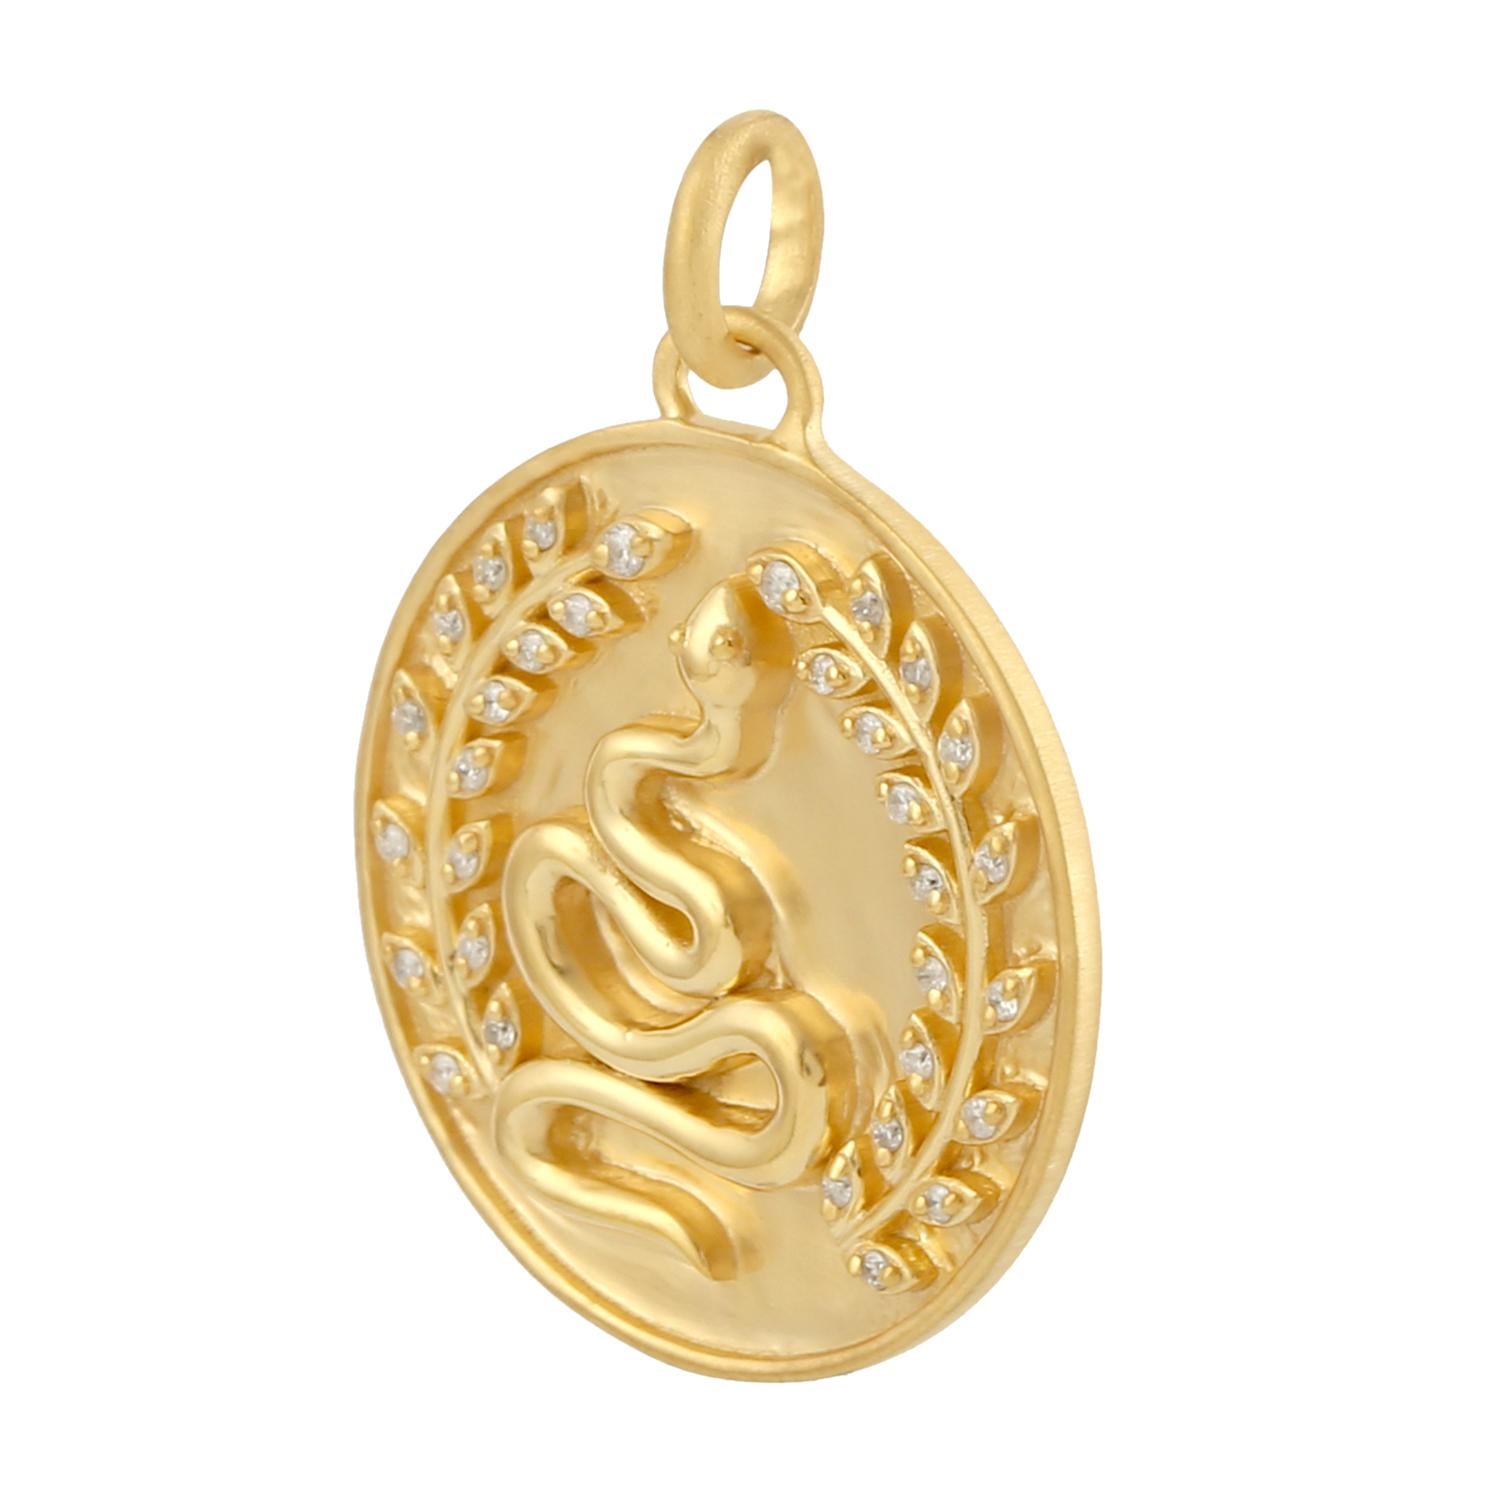 The 14 karat gold enamel pendant is hand set with .12 carats of sparkling diamonds. 

FOLLOW MEGHNA JEWELS storefront to view the latest collection & exclusive pieces. Meghna Jewels is proudly rated as a Top Seller on 1stdibs with 5 star customer